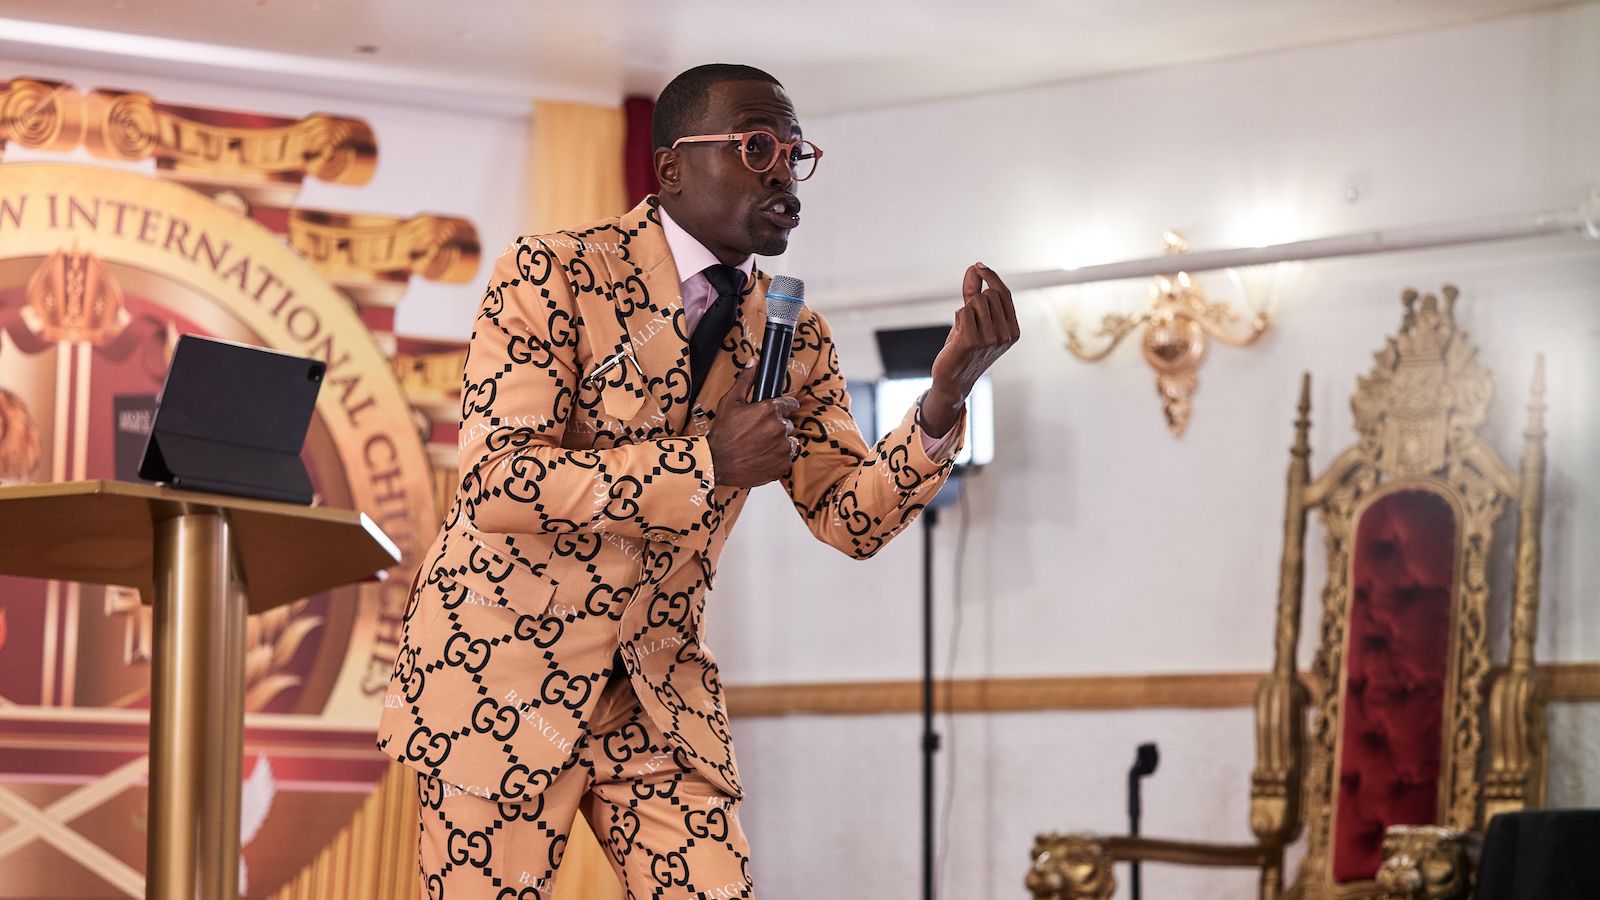 New York's Controversial 'Gucci Pastor' Gets Robbed Of His Gucci